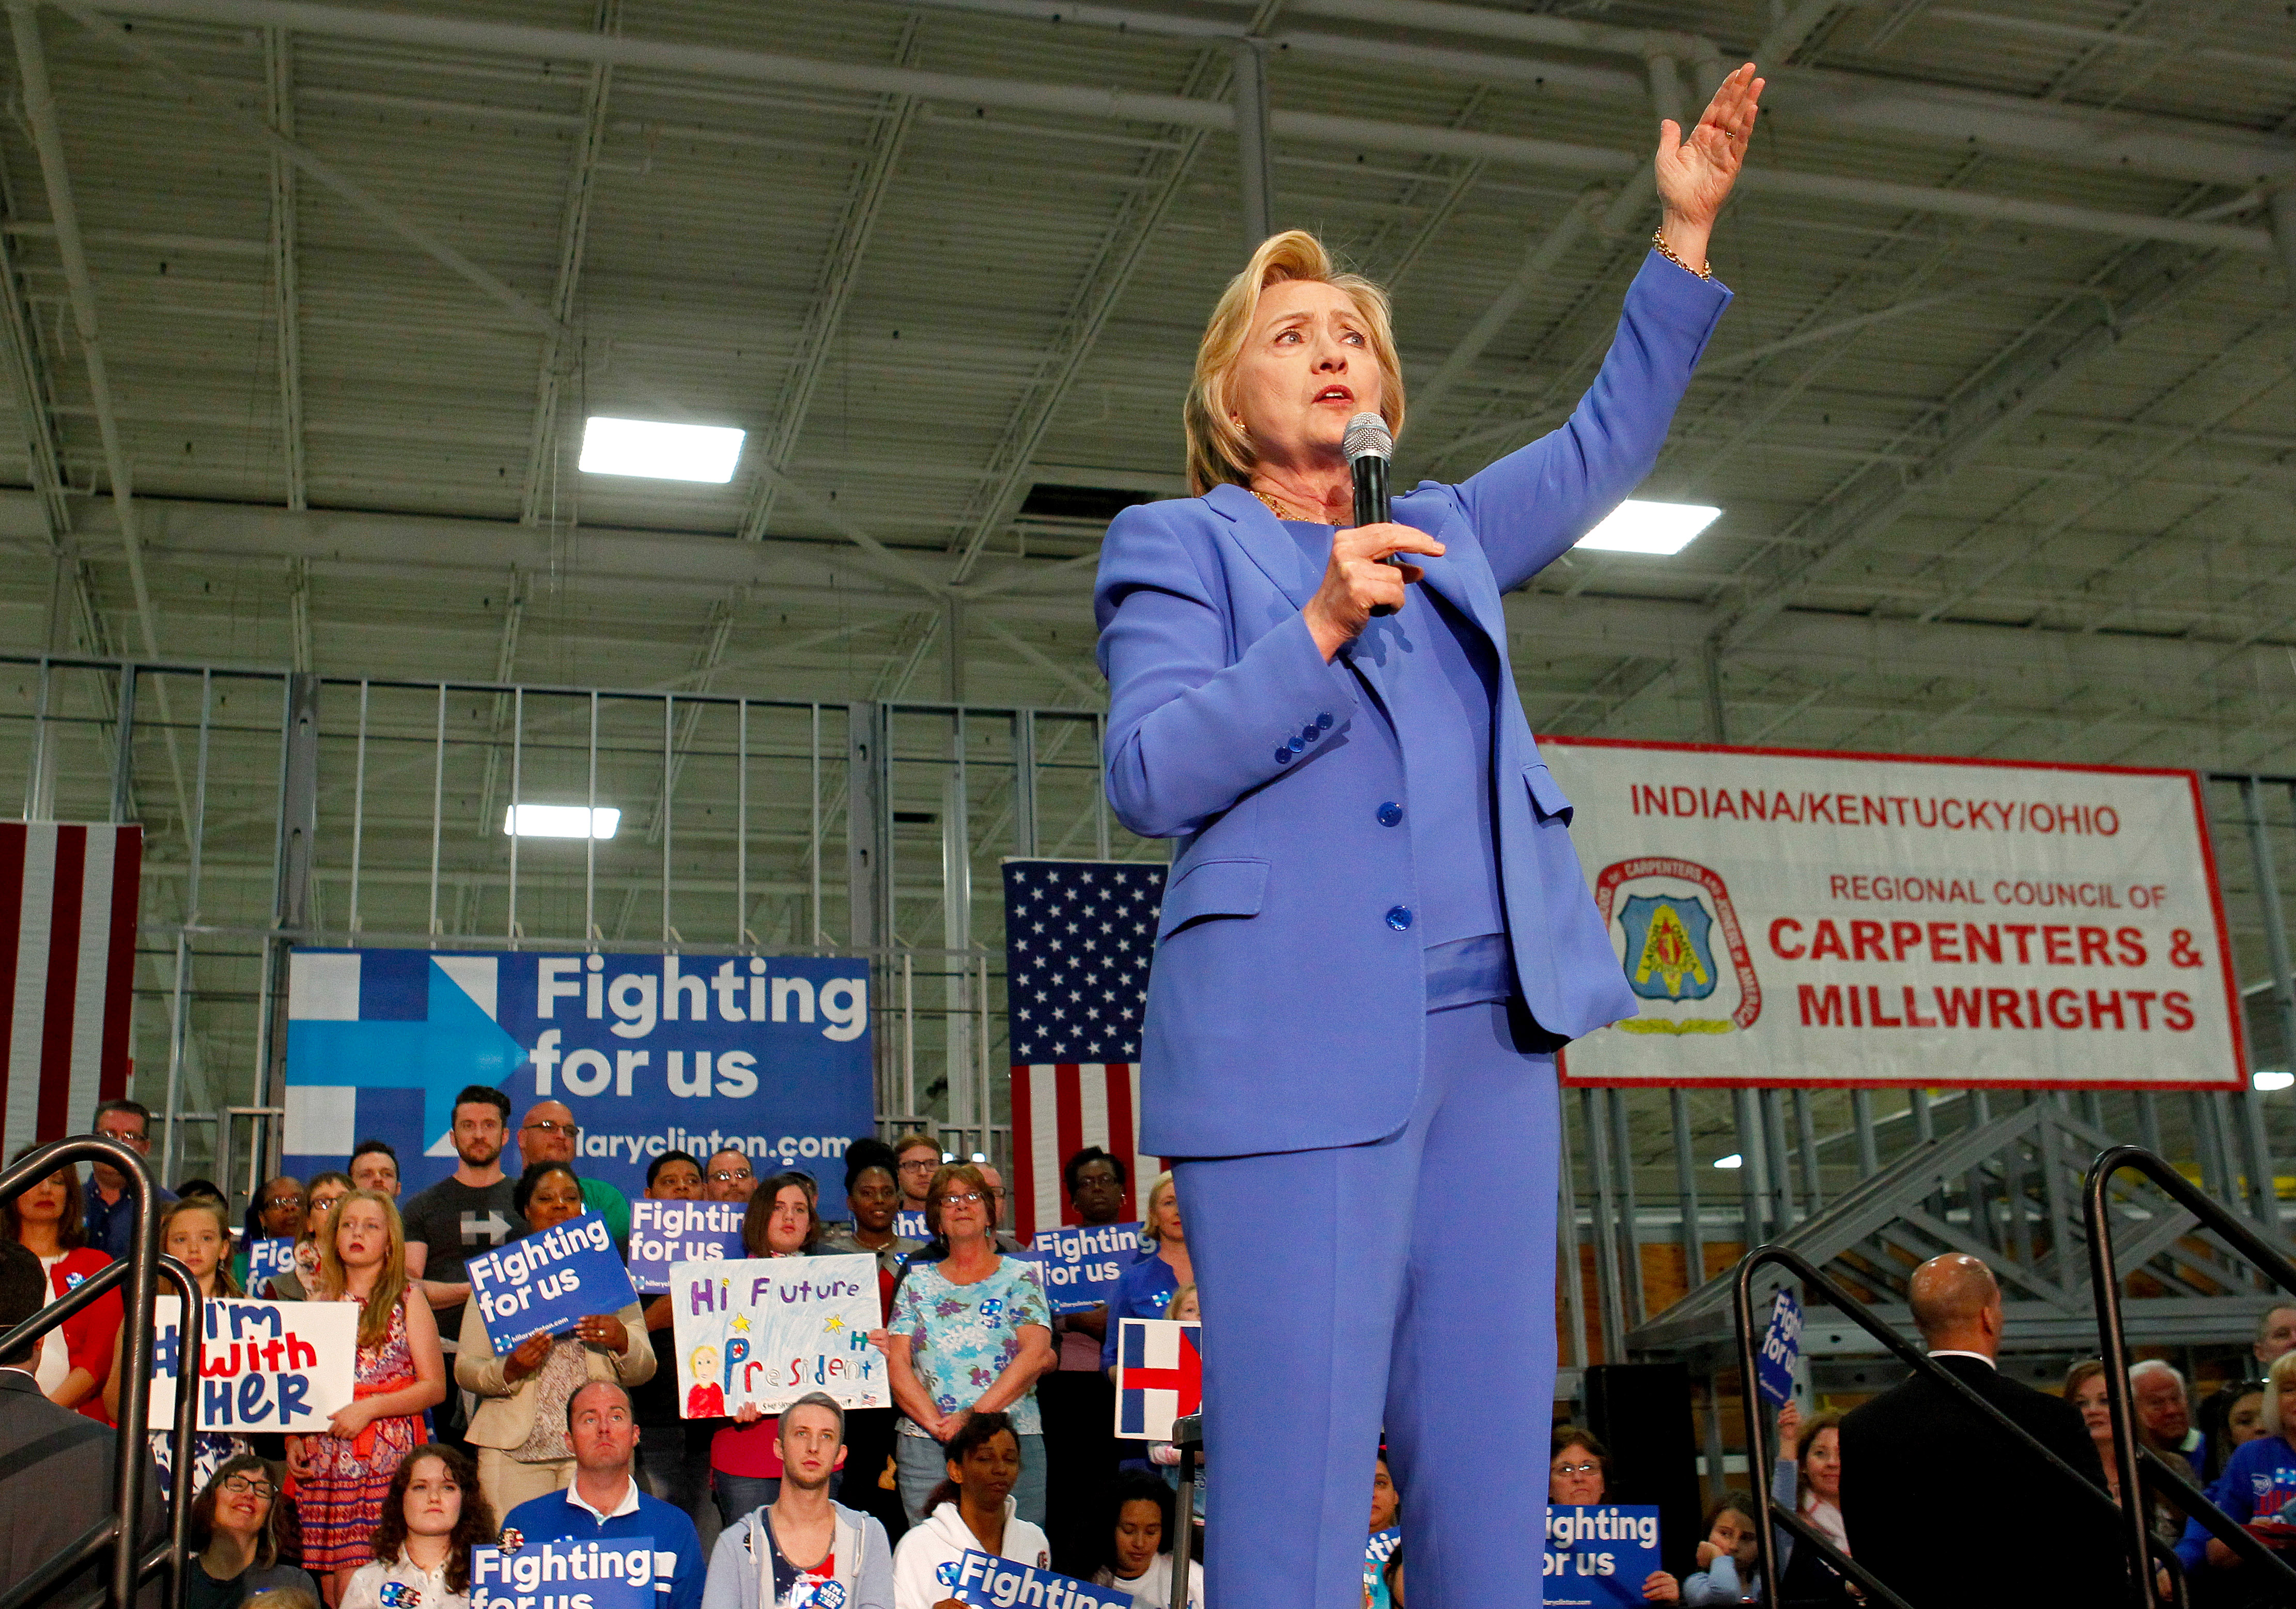 Hillary Clinton addresses the crowd during a campaign stop at the Union of Carpenters and Millwrights Training Center in Louisville, Kentucky, May 15, 2016. (John Sommers II—Getty Images)